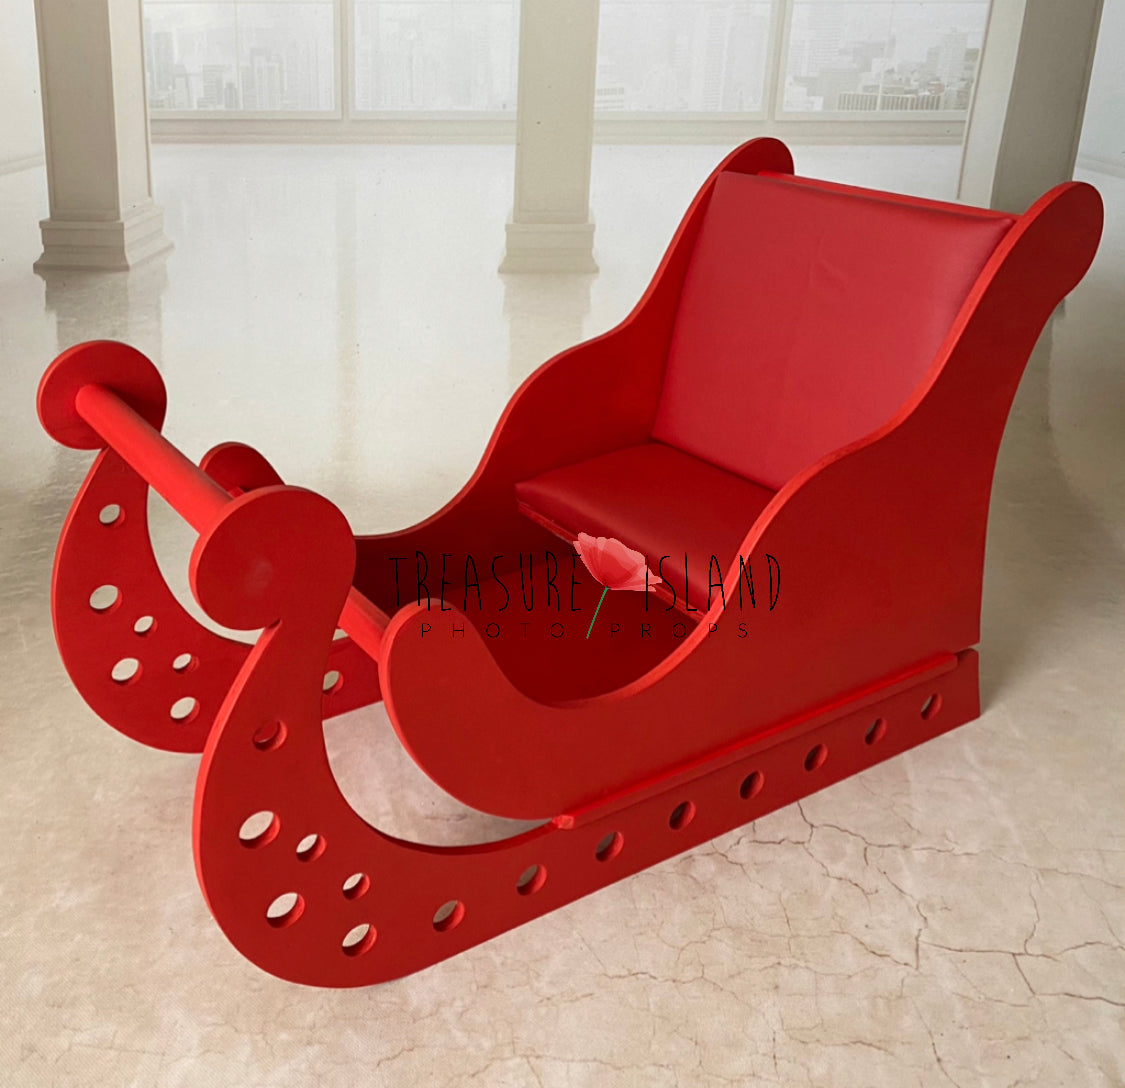 Exclusive SANTA SLEIGH model with holes - Christmas prop - 2 size ( nb & sitter )